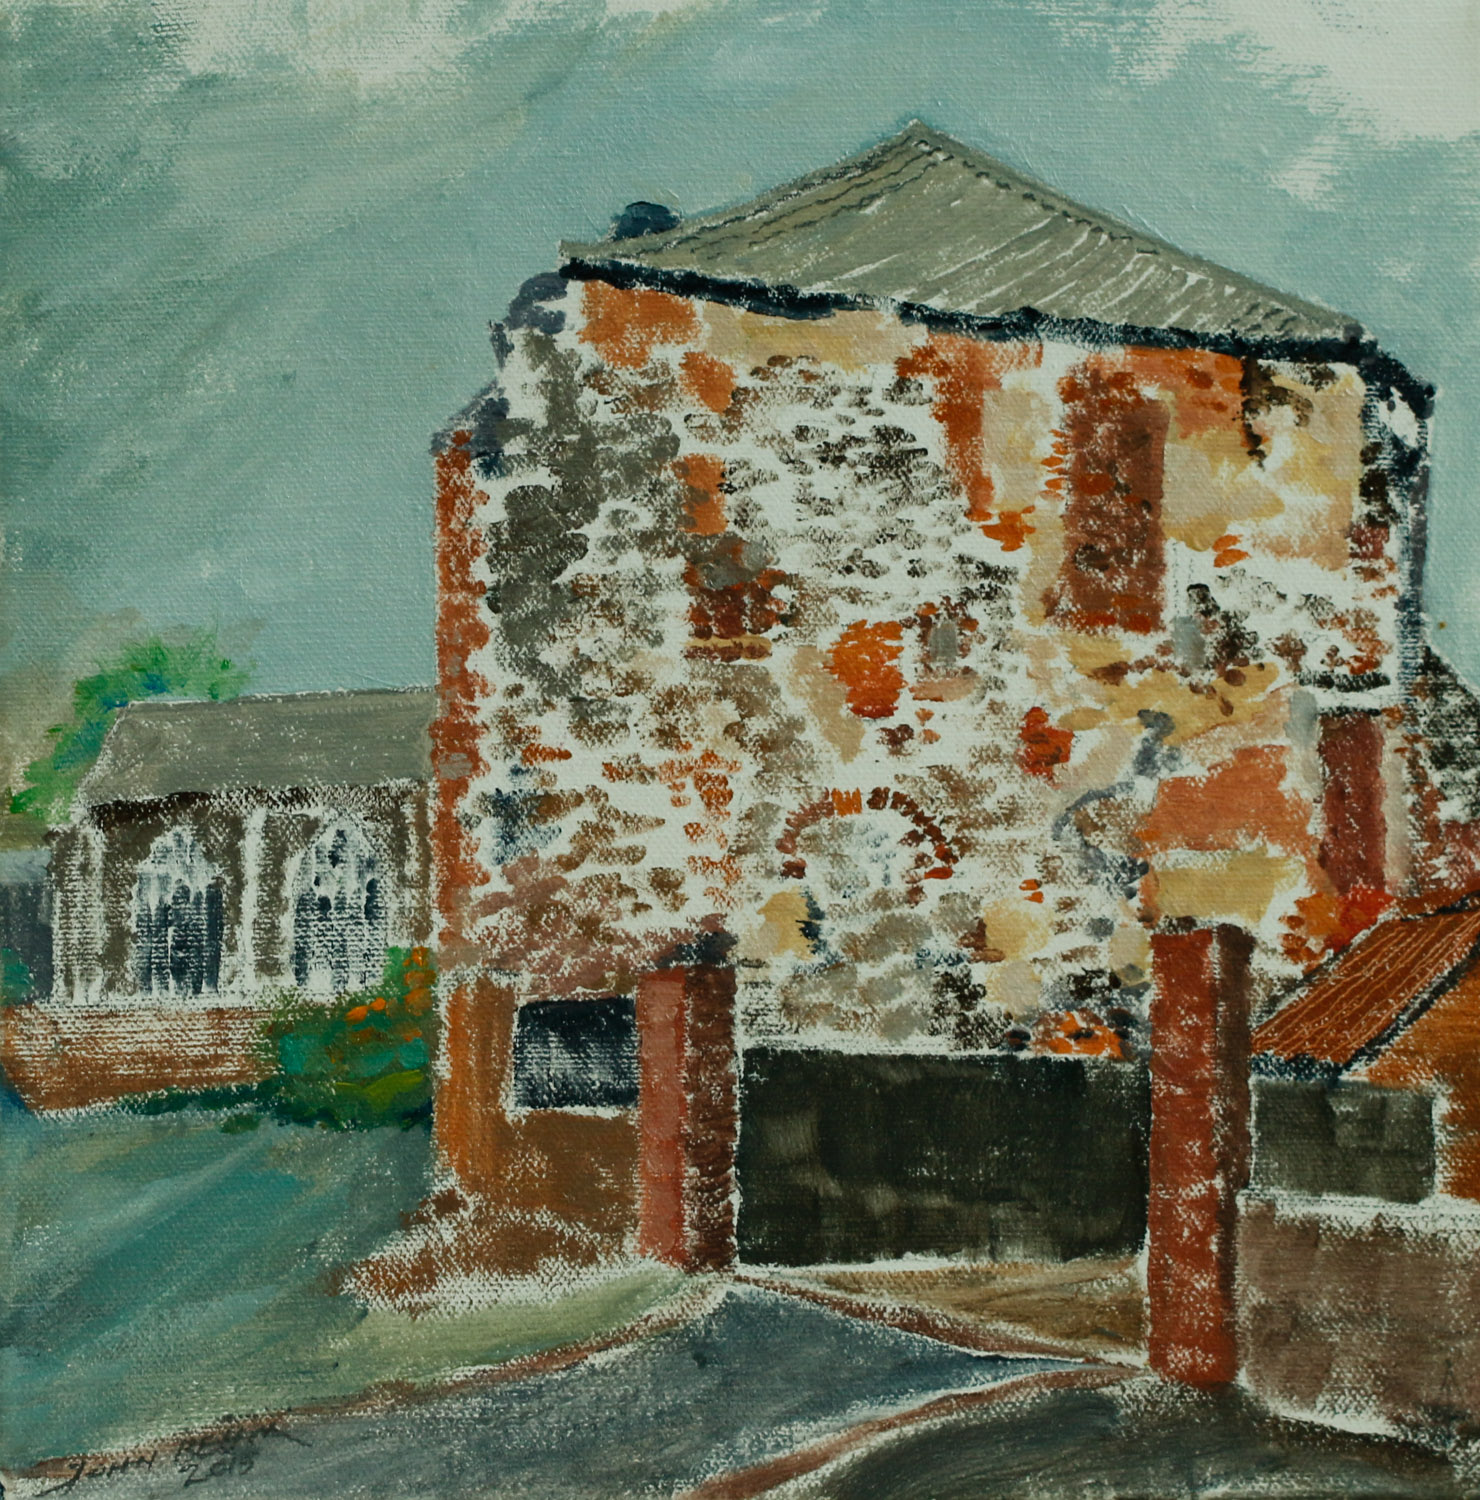 Artist John Behm - Local Colour, The Monastery, Elm Hill, £250 10x10 Oil on Canvas at Paint Out Norwich 2015